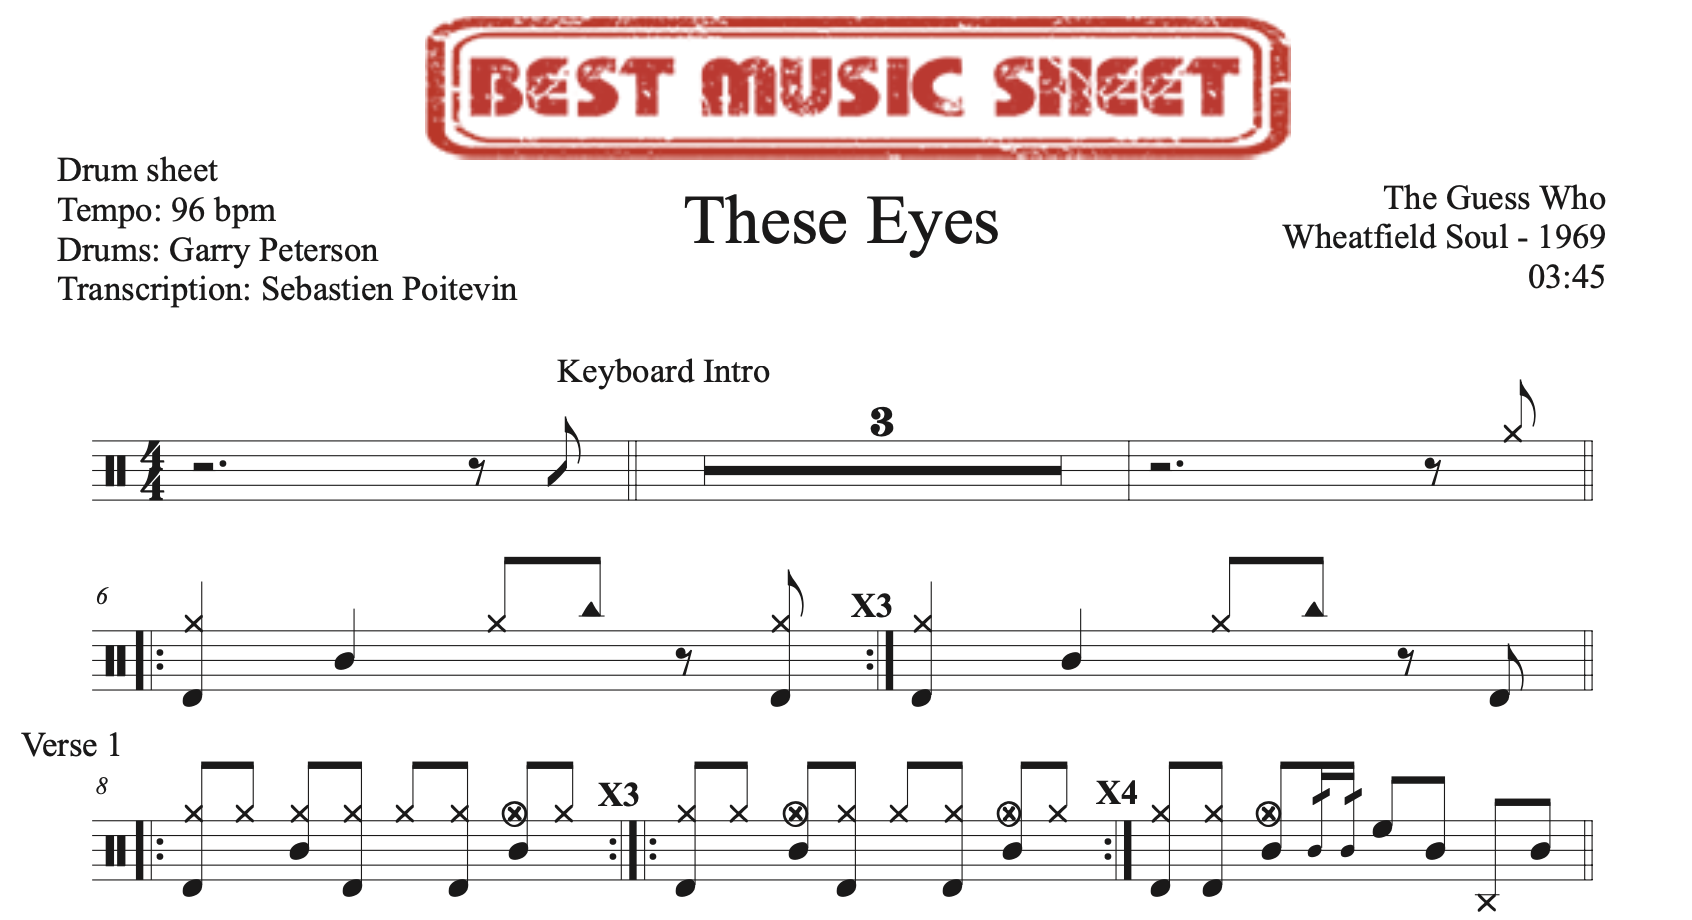 sample of the drum sheet of These Eyes by The Guess Who